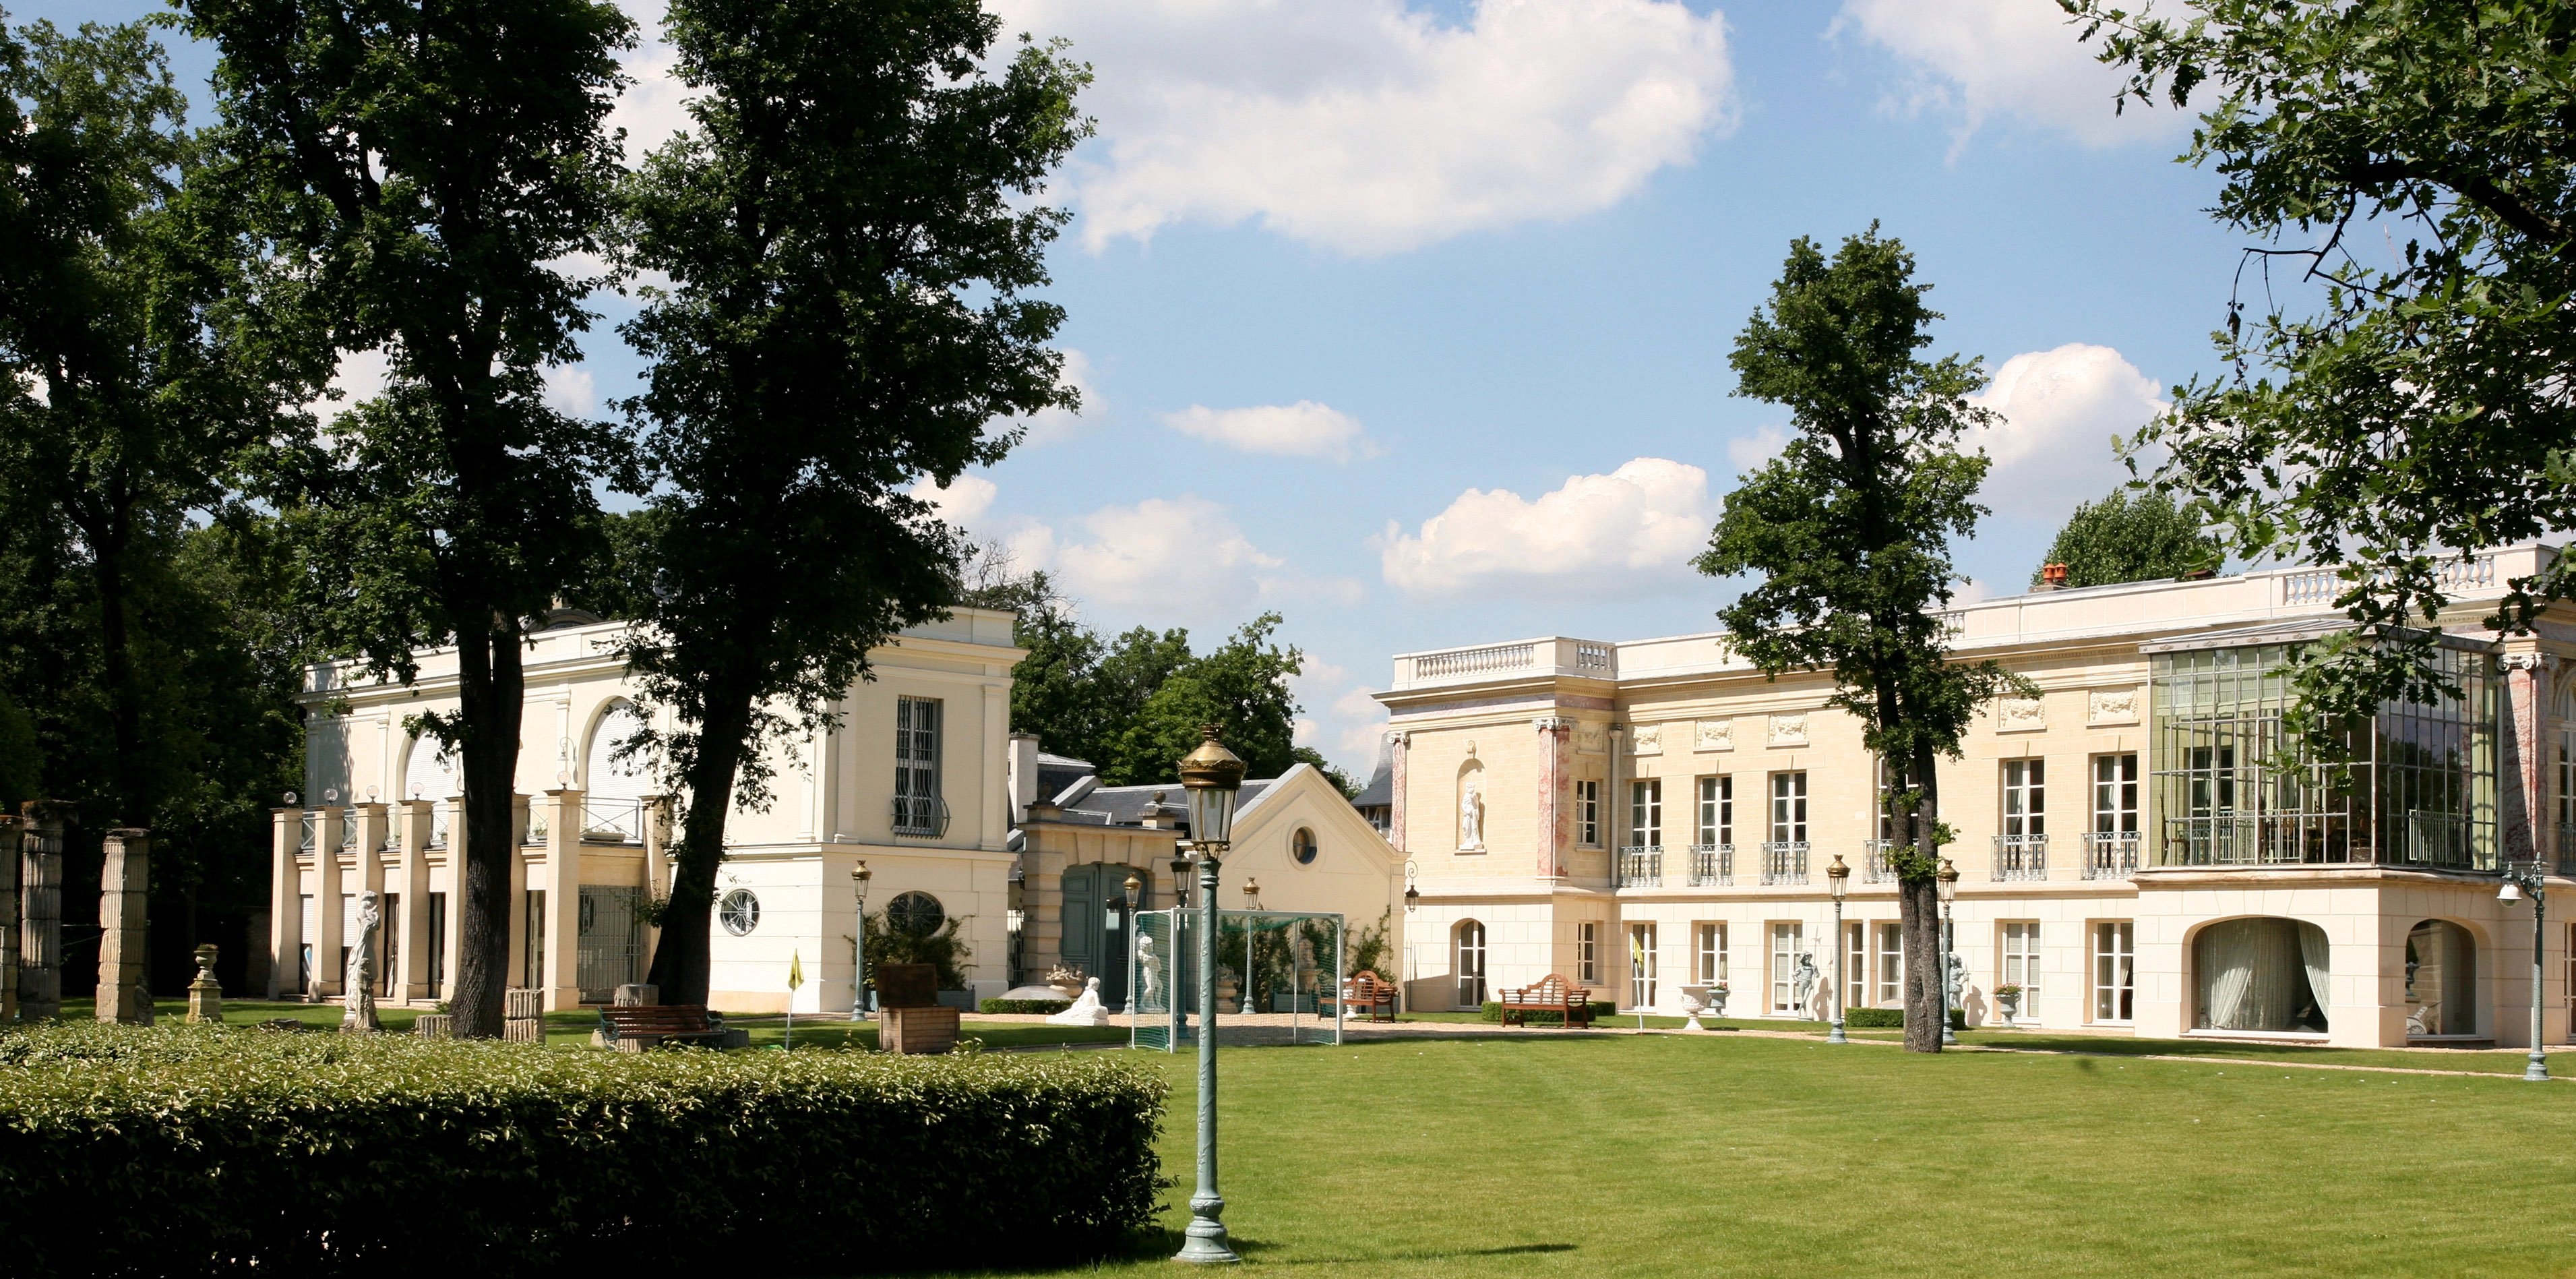 A sublime Palais inspired by Grand Trianon Palace, 20 min from Paris_1741